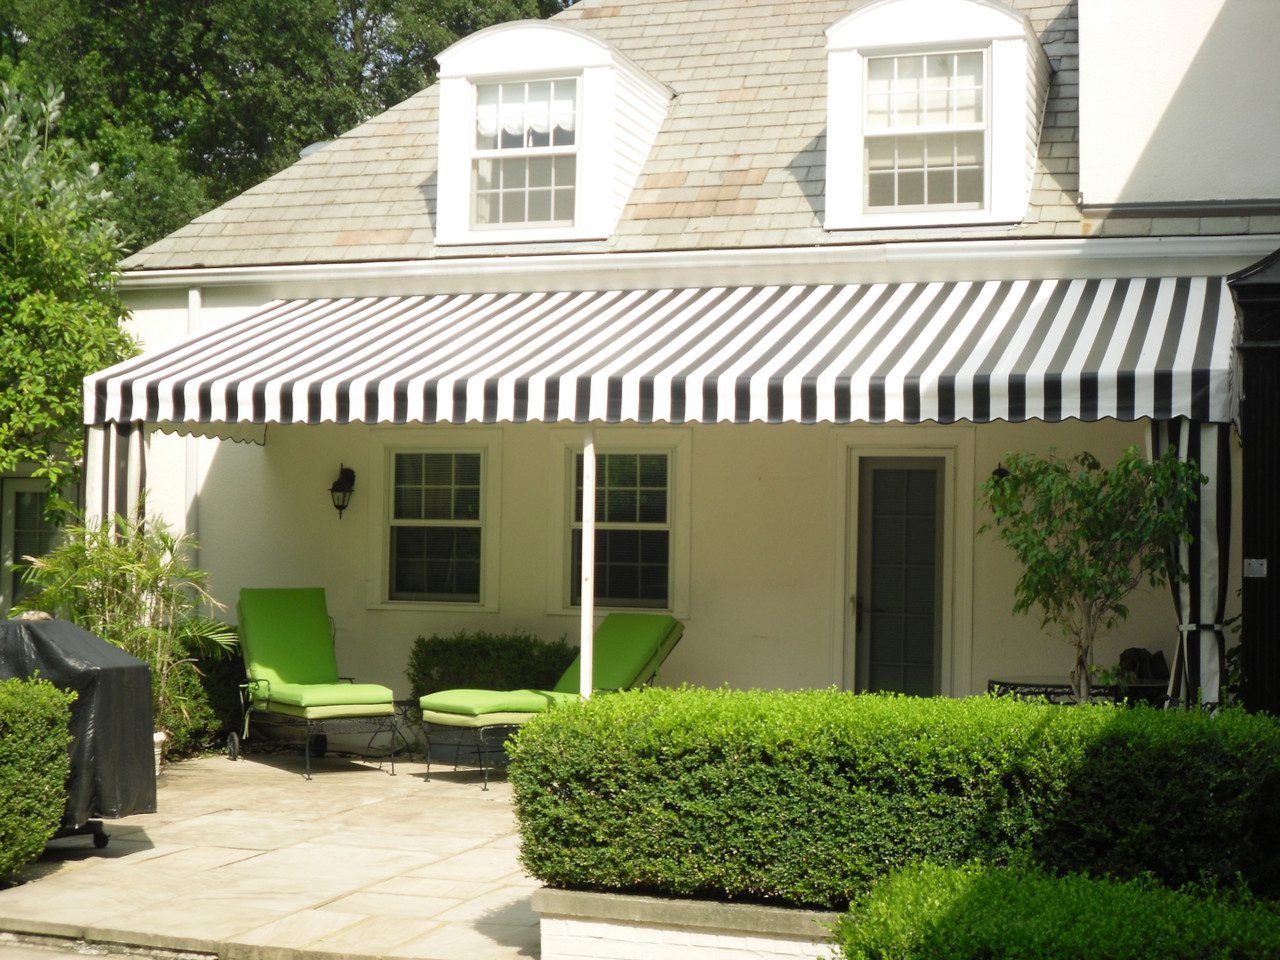 A house with a black and white awning